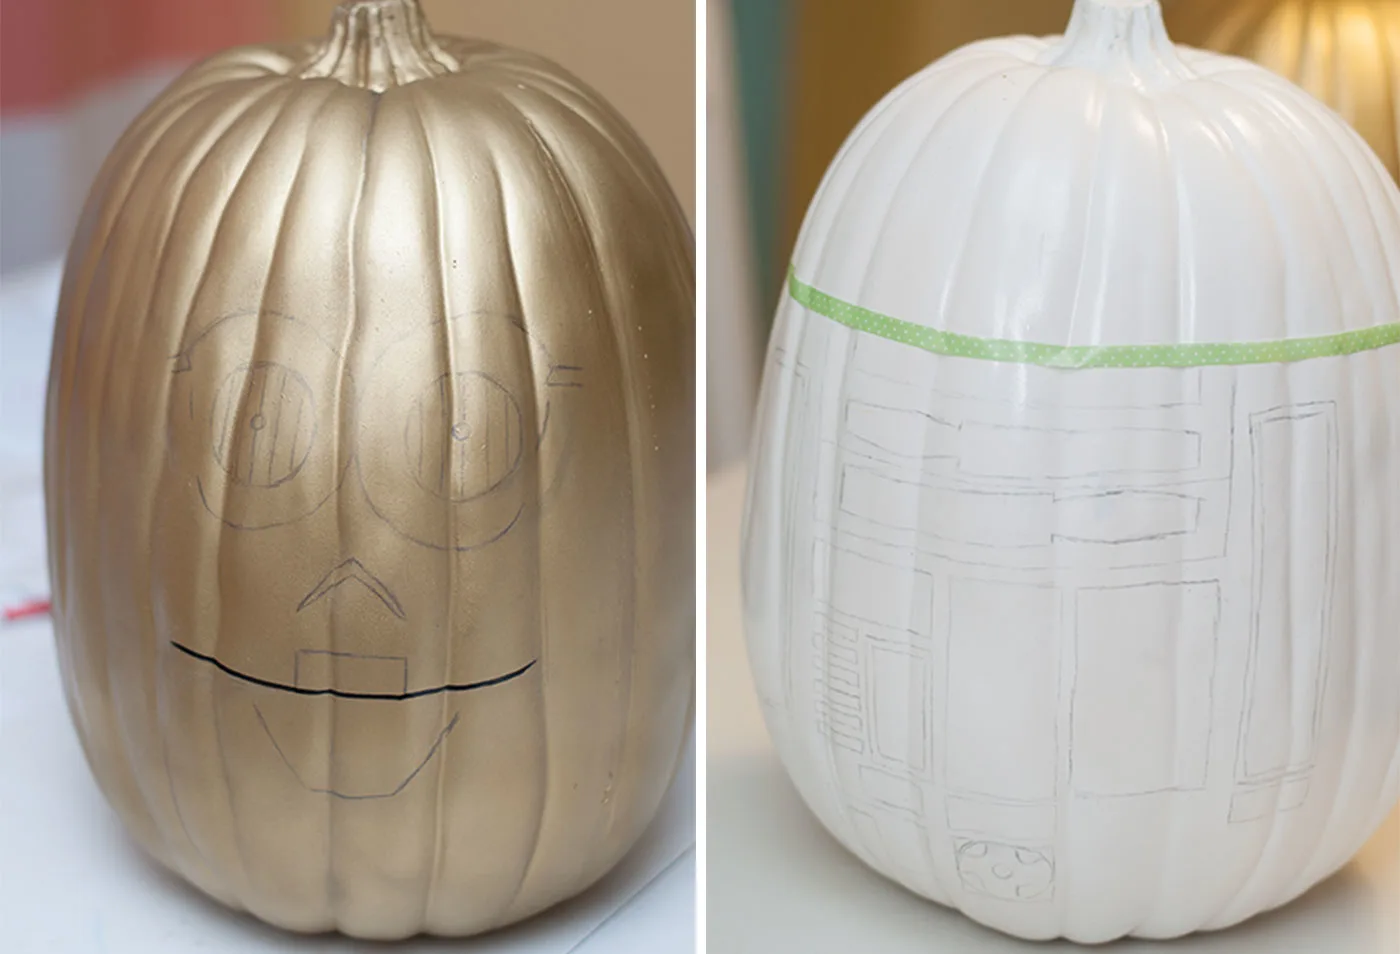 Droid drawings sketched onto the pumpkins